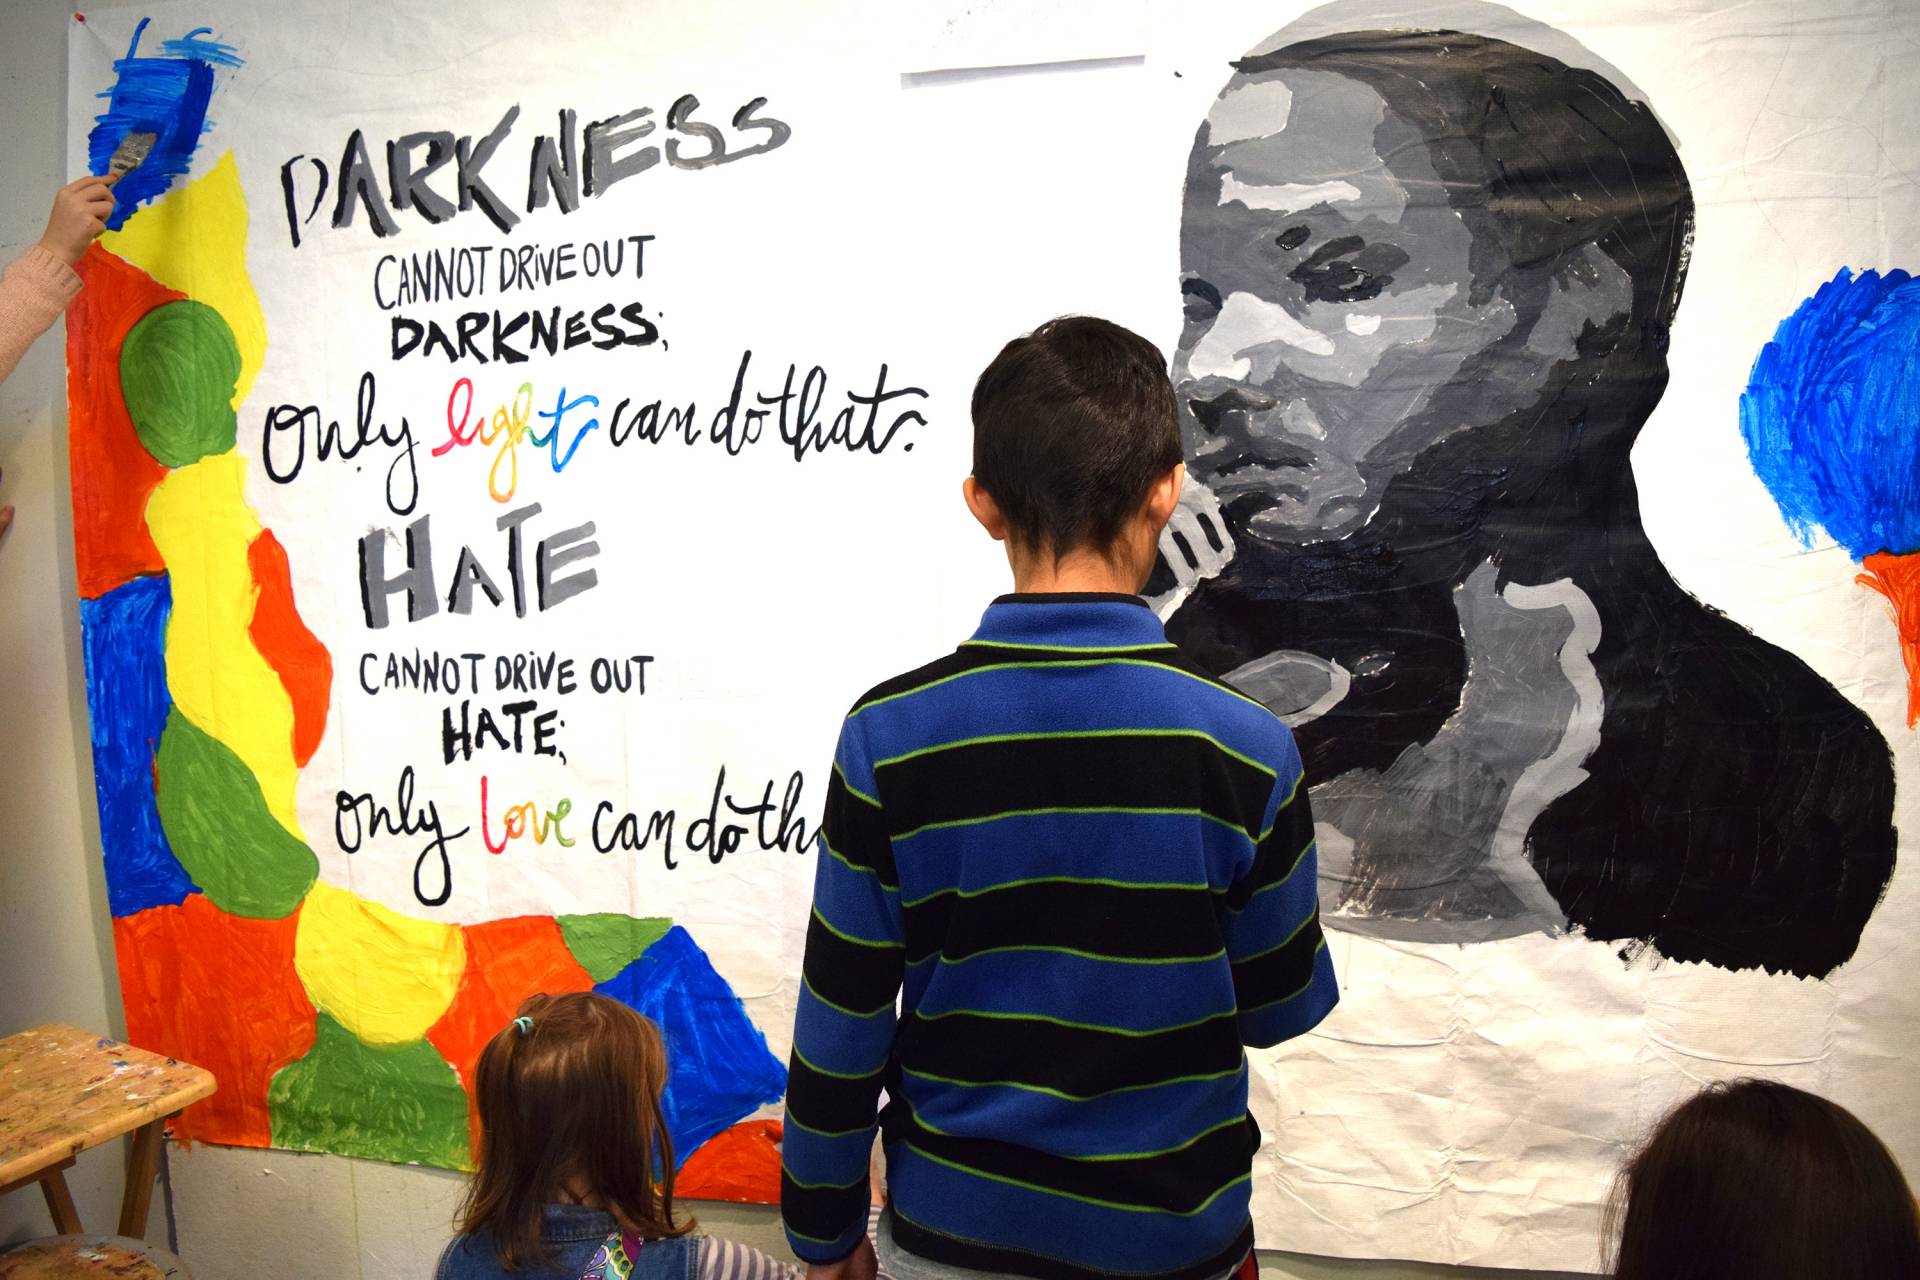 A child helps paint a mural with a quote from Martin Luther King: "Darkness cannot drive out darkness; only the light can do that. Hate cannot drive out hate; only love can do that."